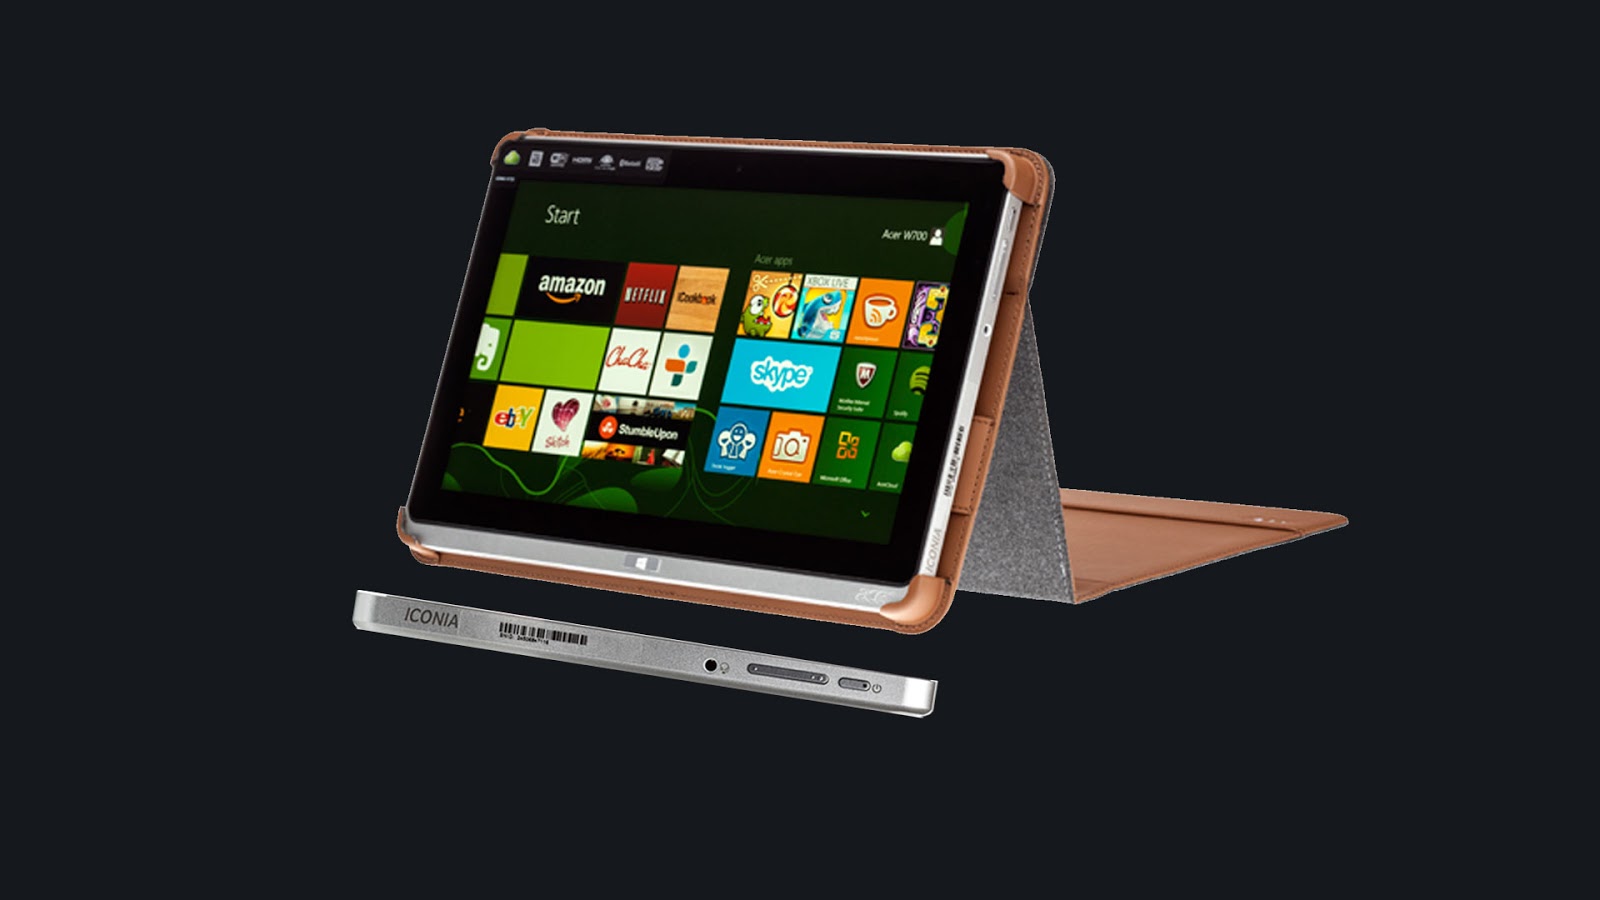 Acer Iconia W7 Tablet PC Review | Tablet-Laptop Magazine Reviews & Specifications